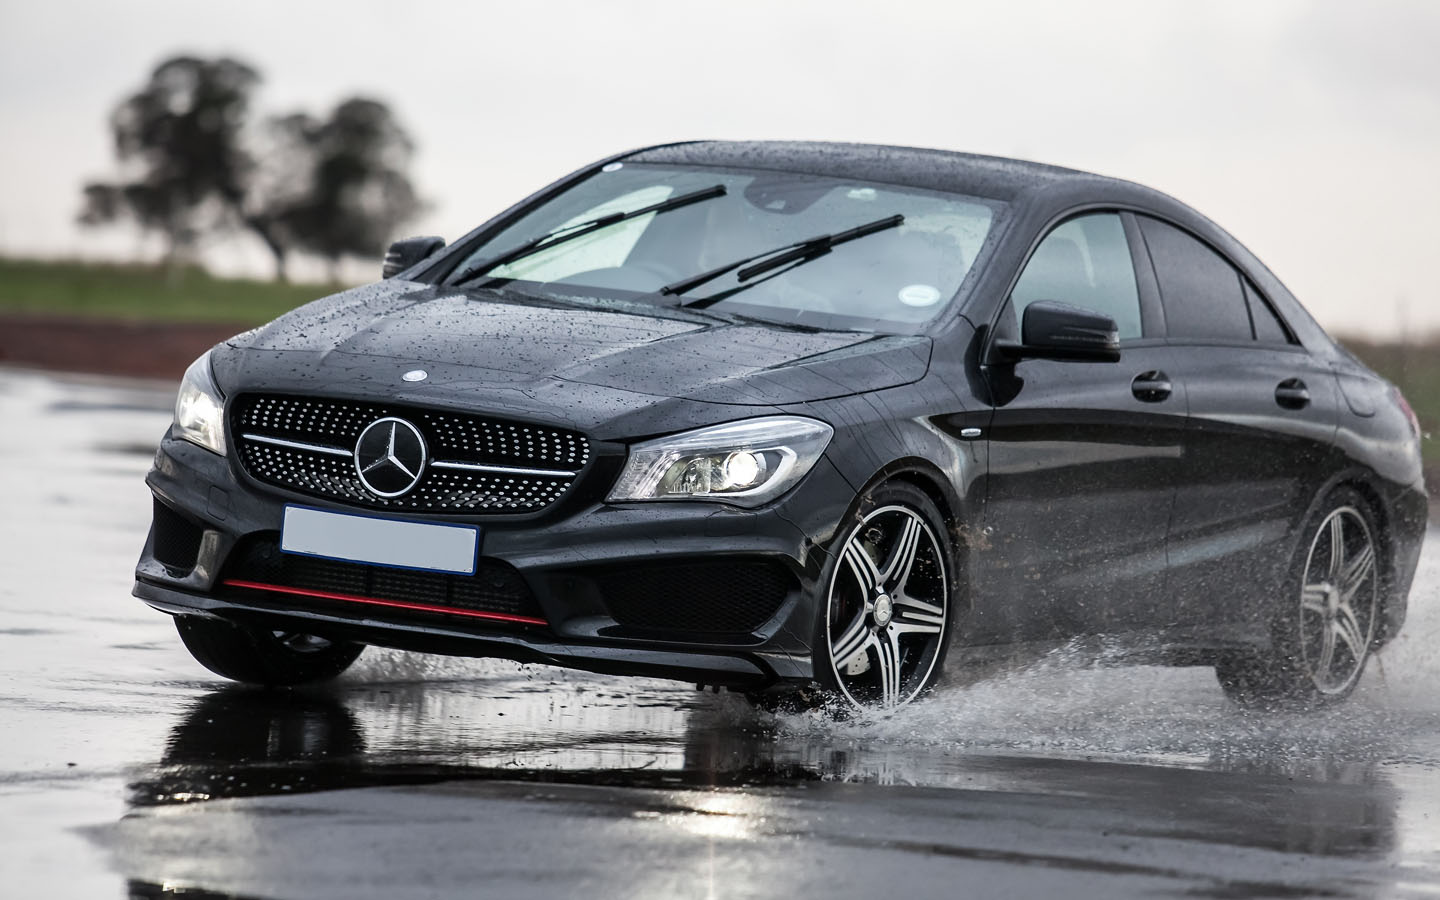 Hydroplaning causes loss of traction control